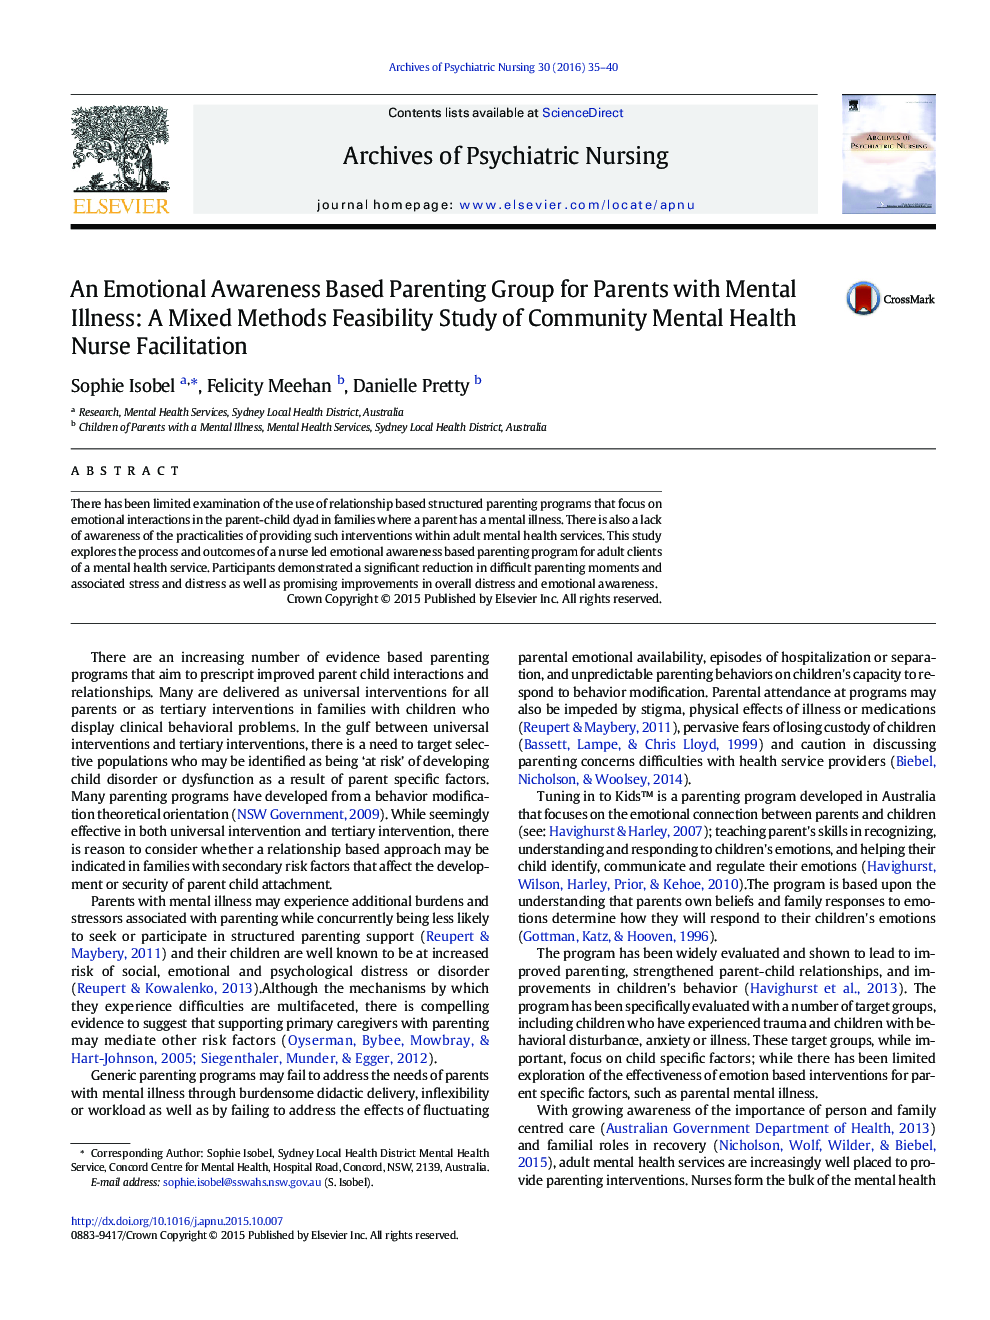 An Emotional Awareness Based Parenting Group for Parents with Mental Illness: A Mixed Methods Feasibility Study of Community Mental Health Nurse Facilitation